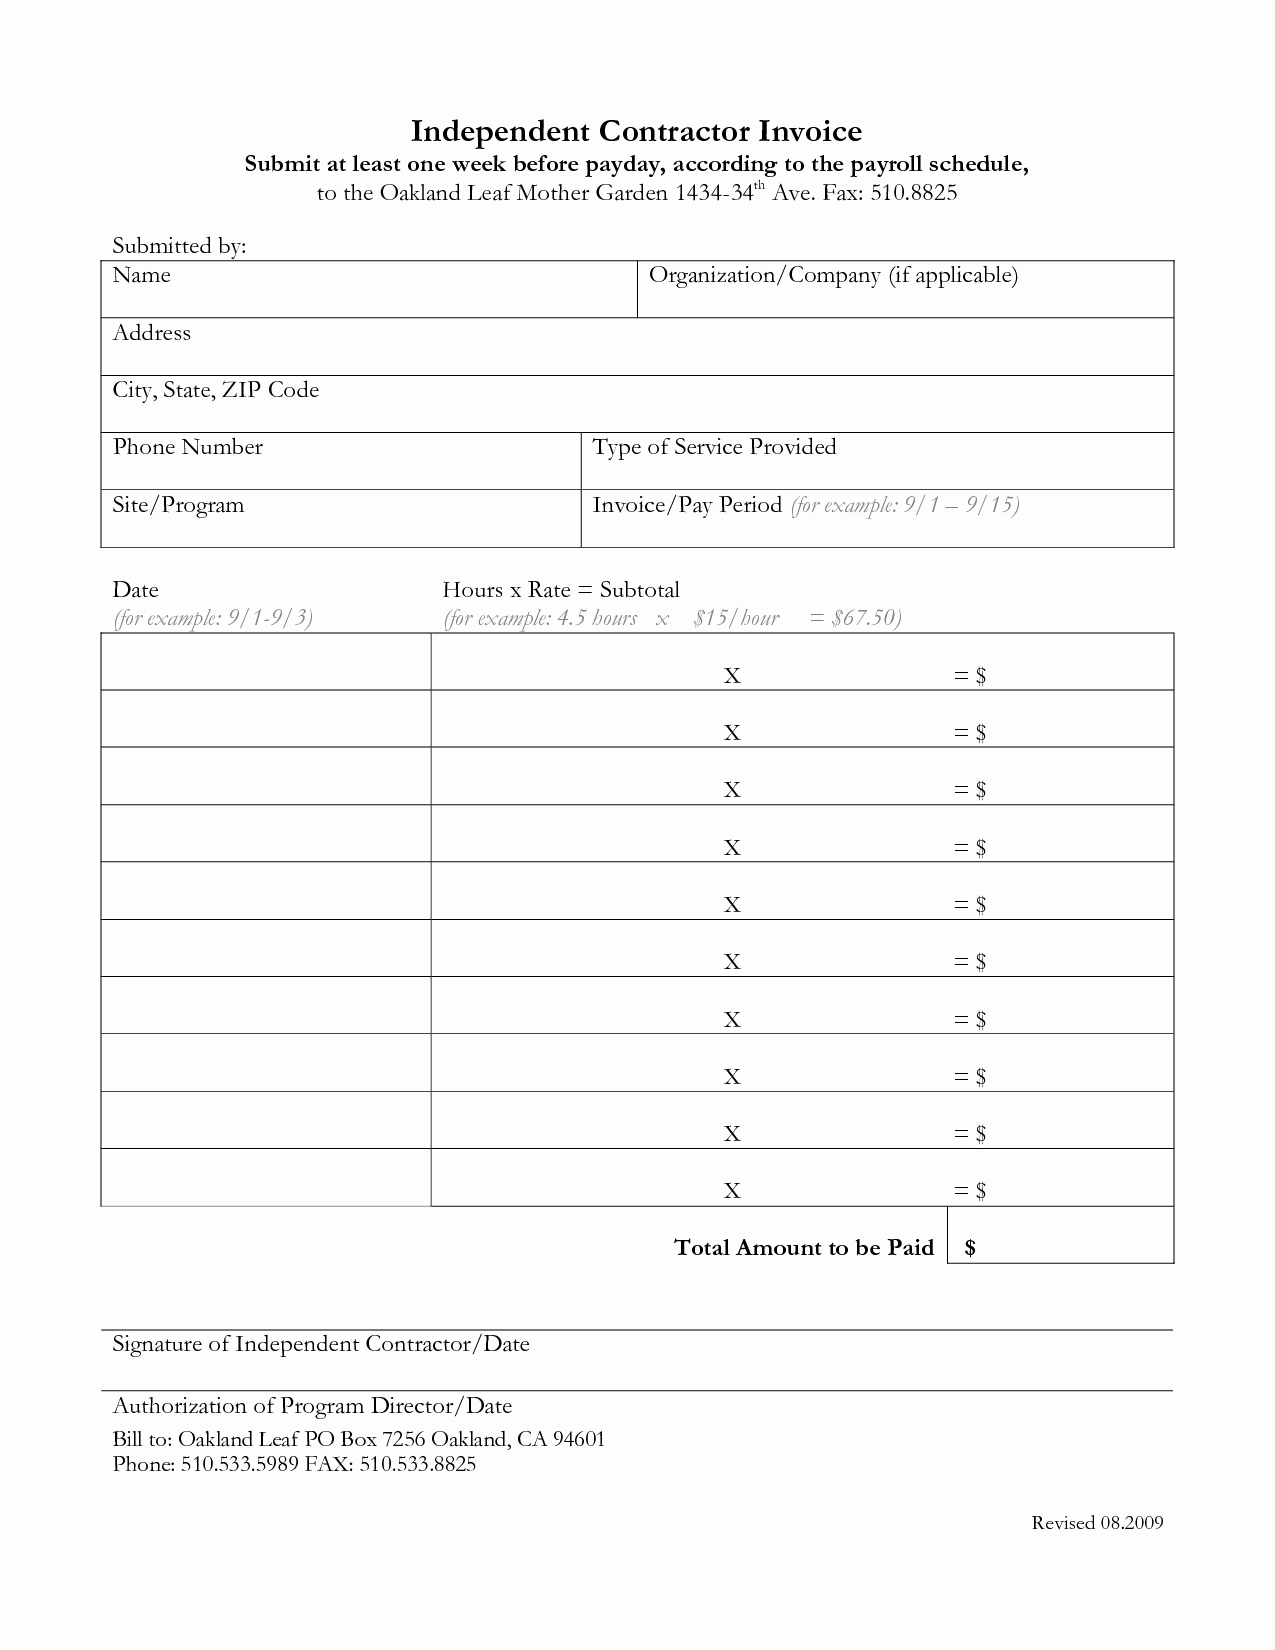 Independent Contractor Invoice Template Excel Elegant Independent Contractor Invoice Invoice Template Ideas